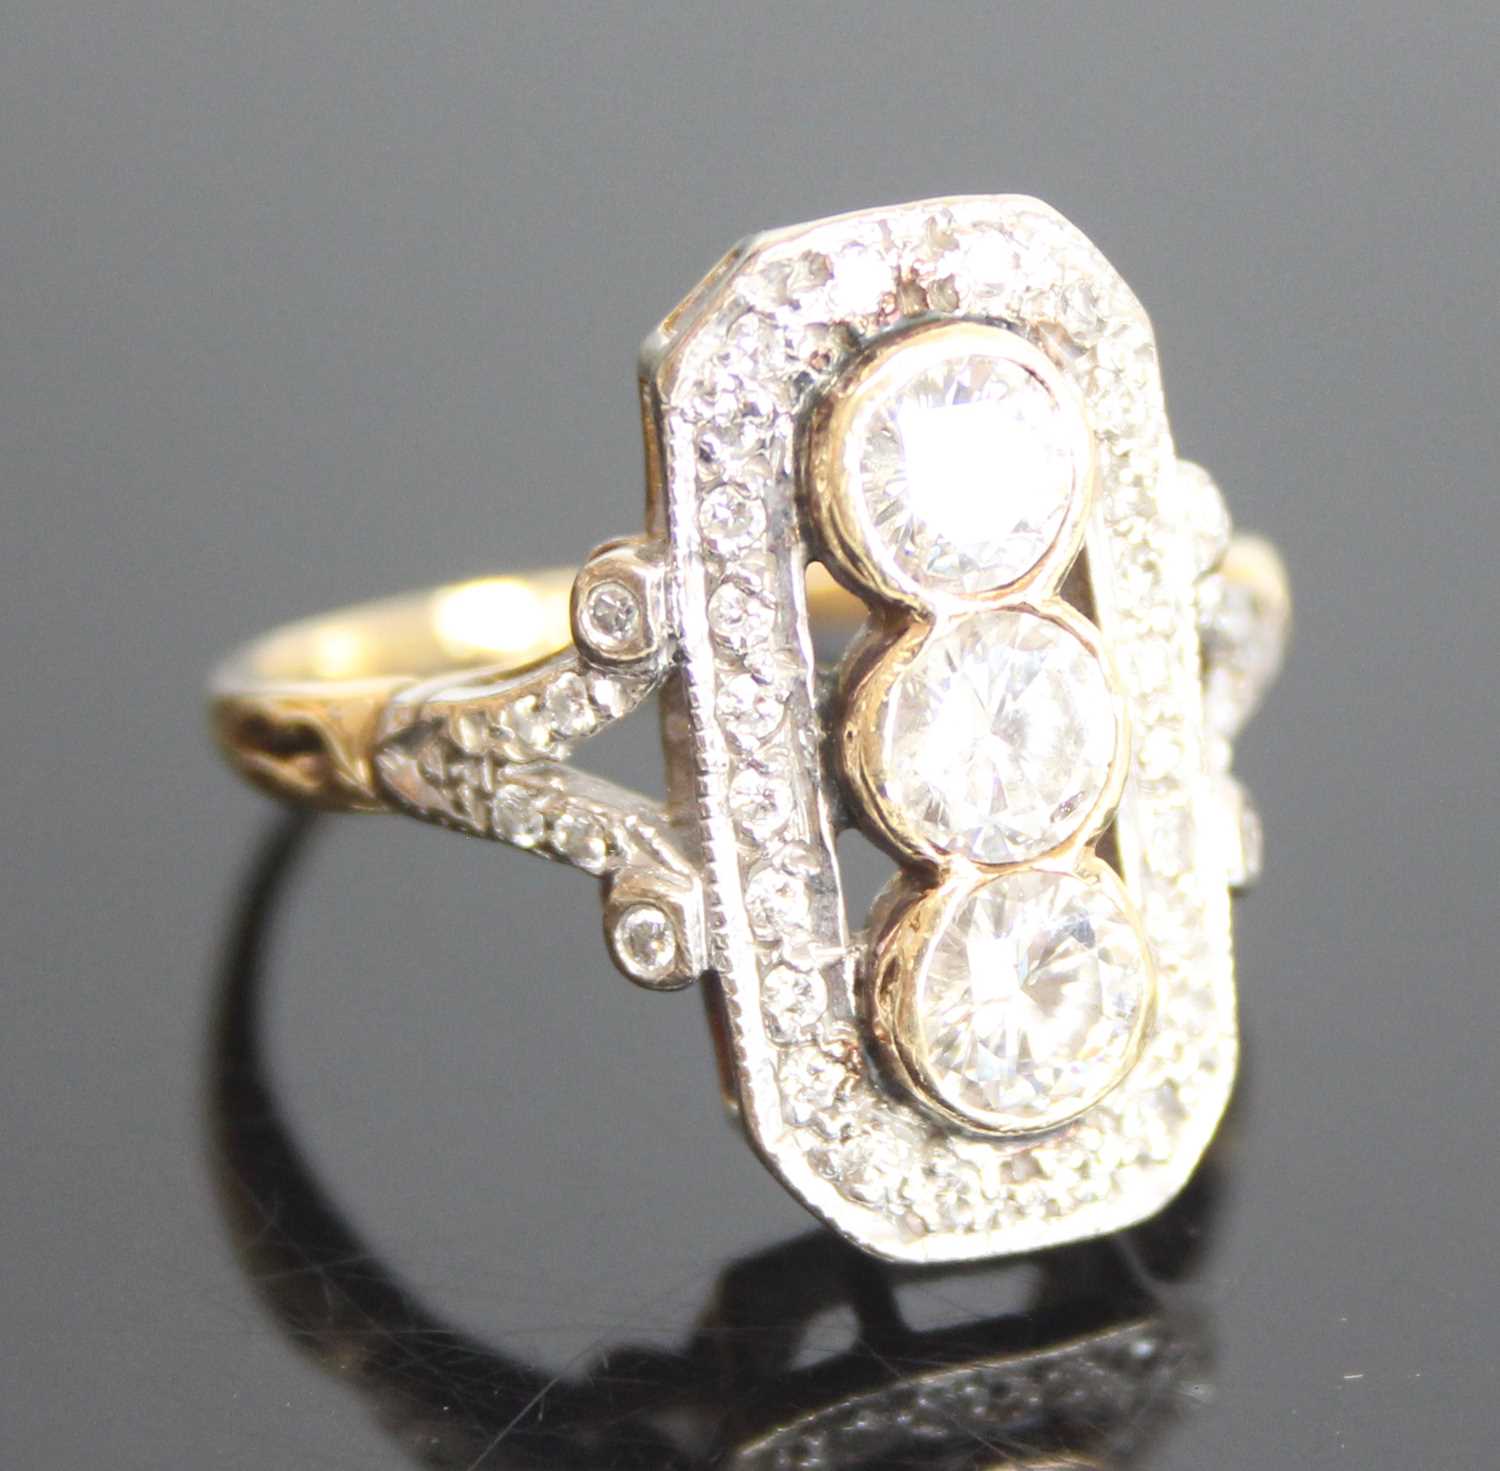 An 18ct yellow and white gold Art Deco style panel ring comprising 3 round brilliant cut diamonds in - Image 2 of 7